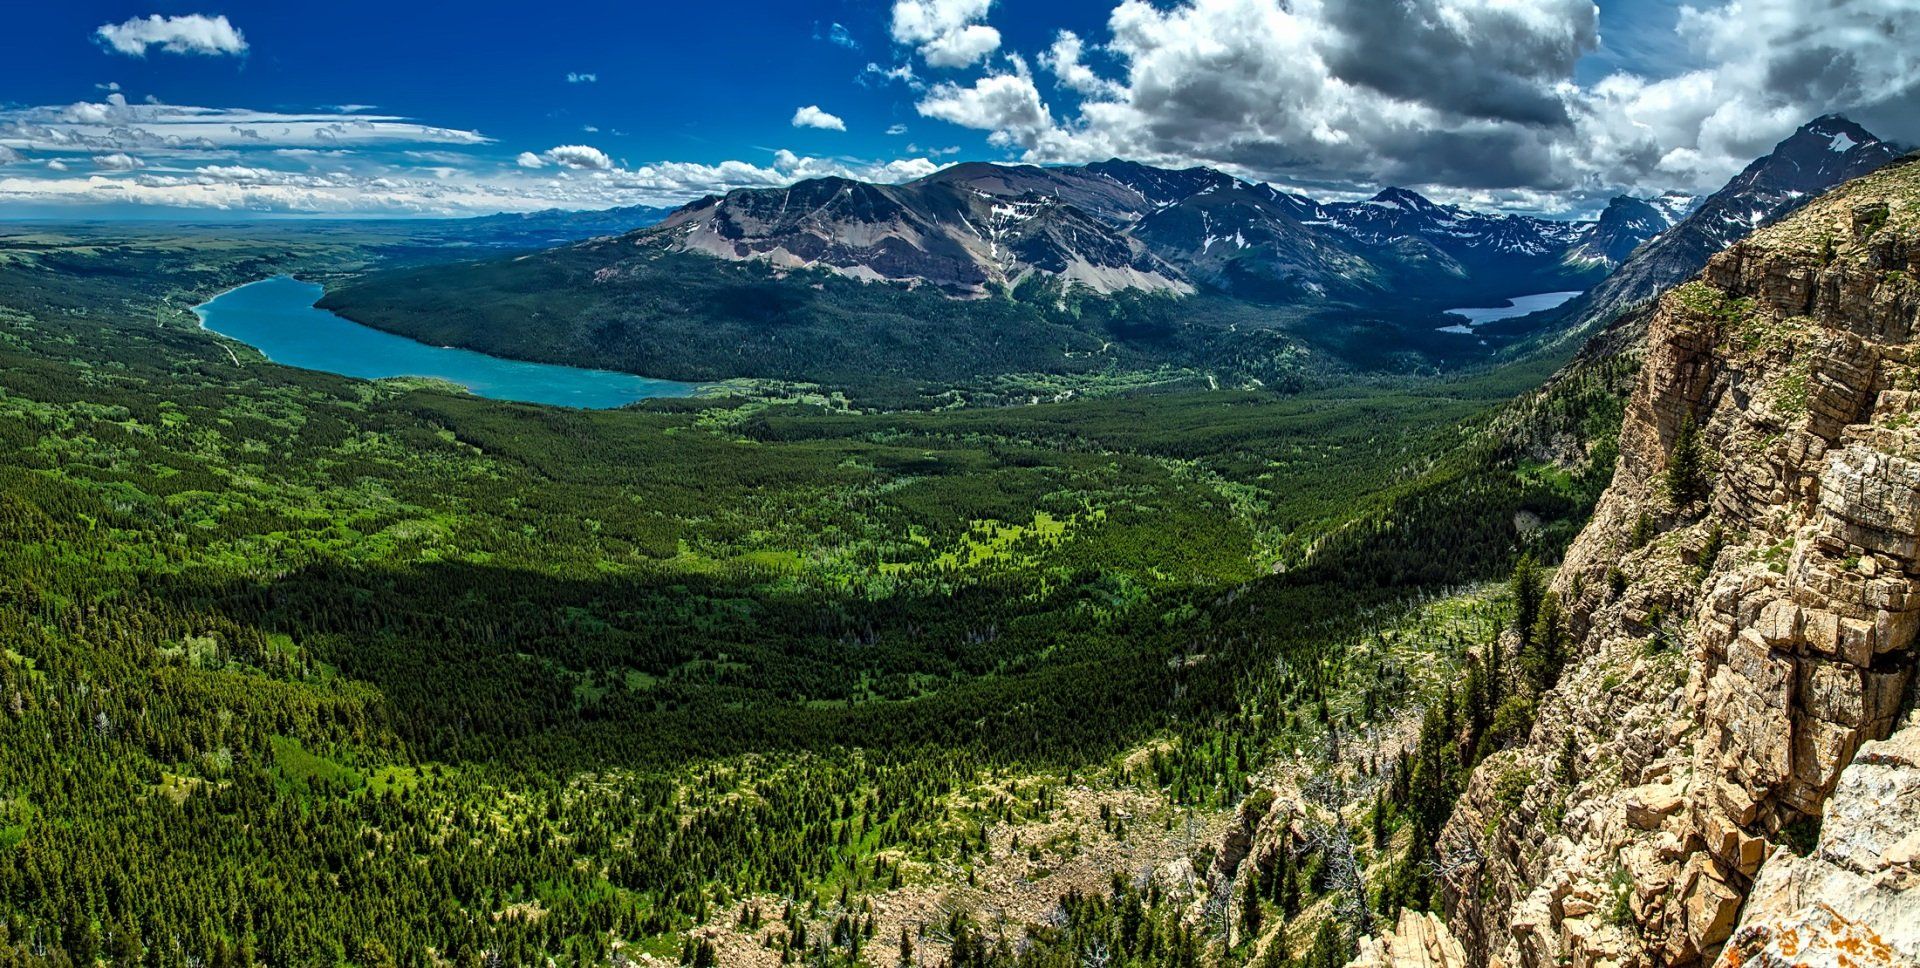 An aerial view of a lake surrounded by mountains and trees.